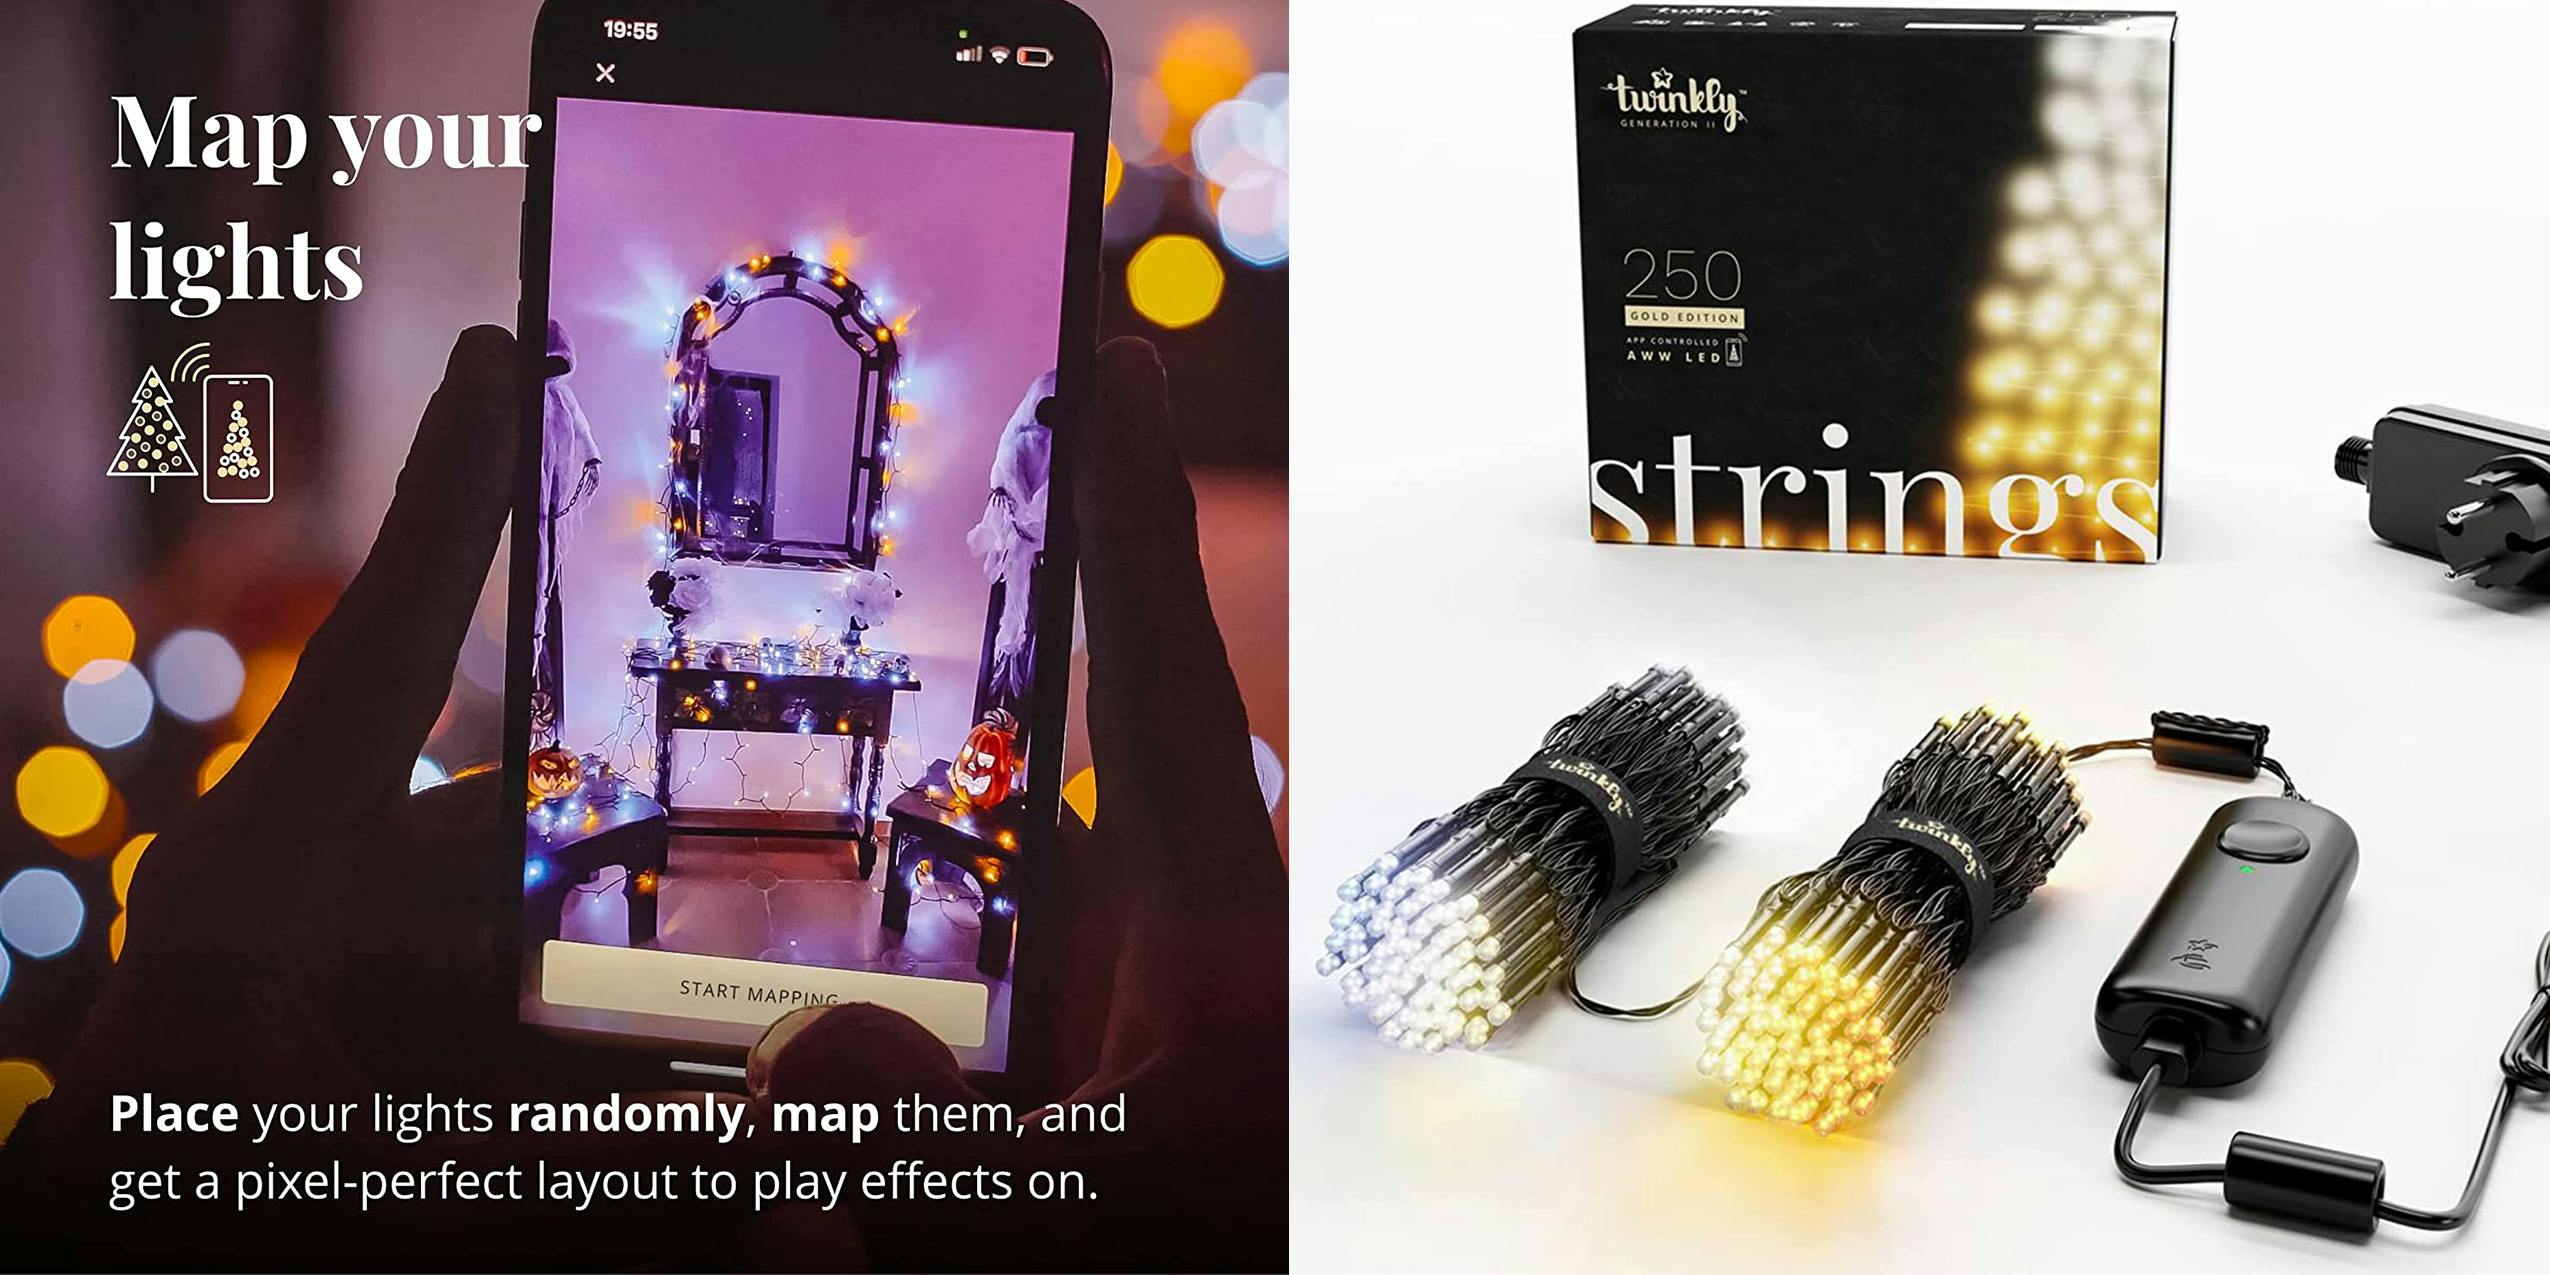 How to control Christmas lights using your smartphone